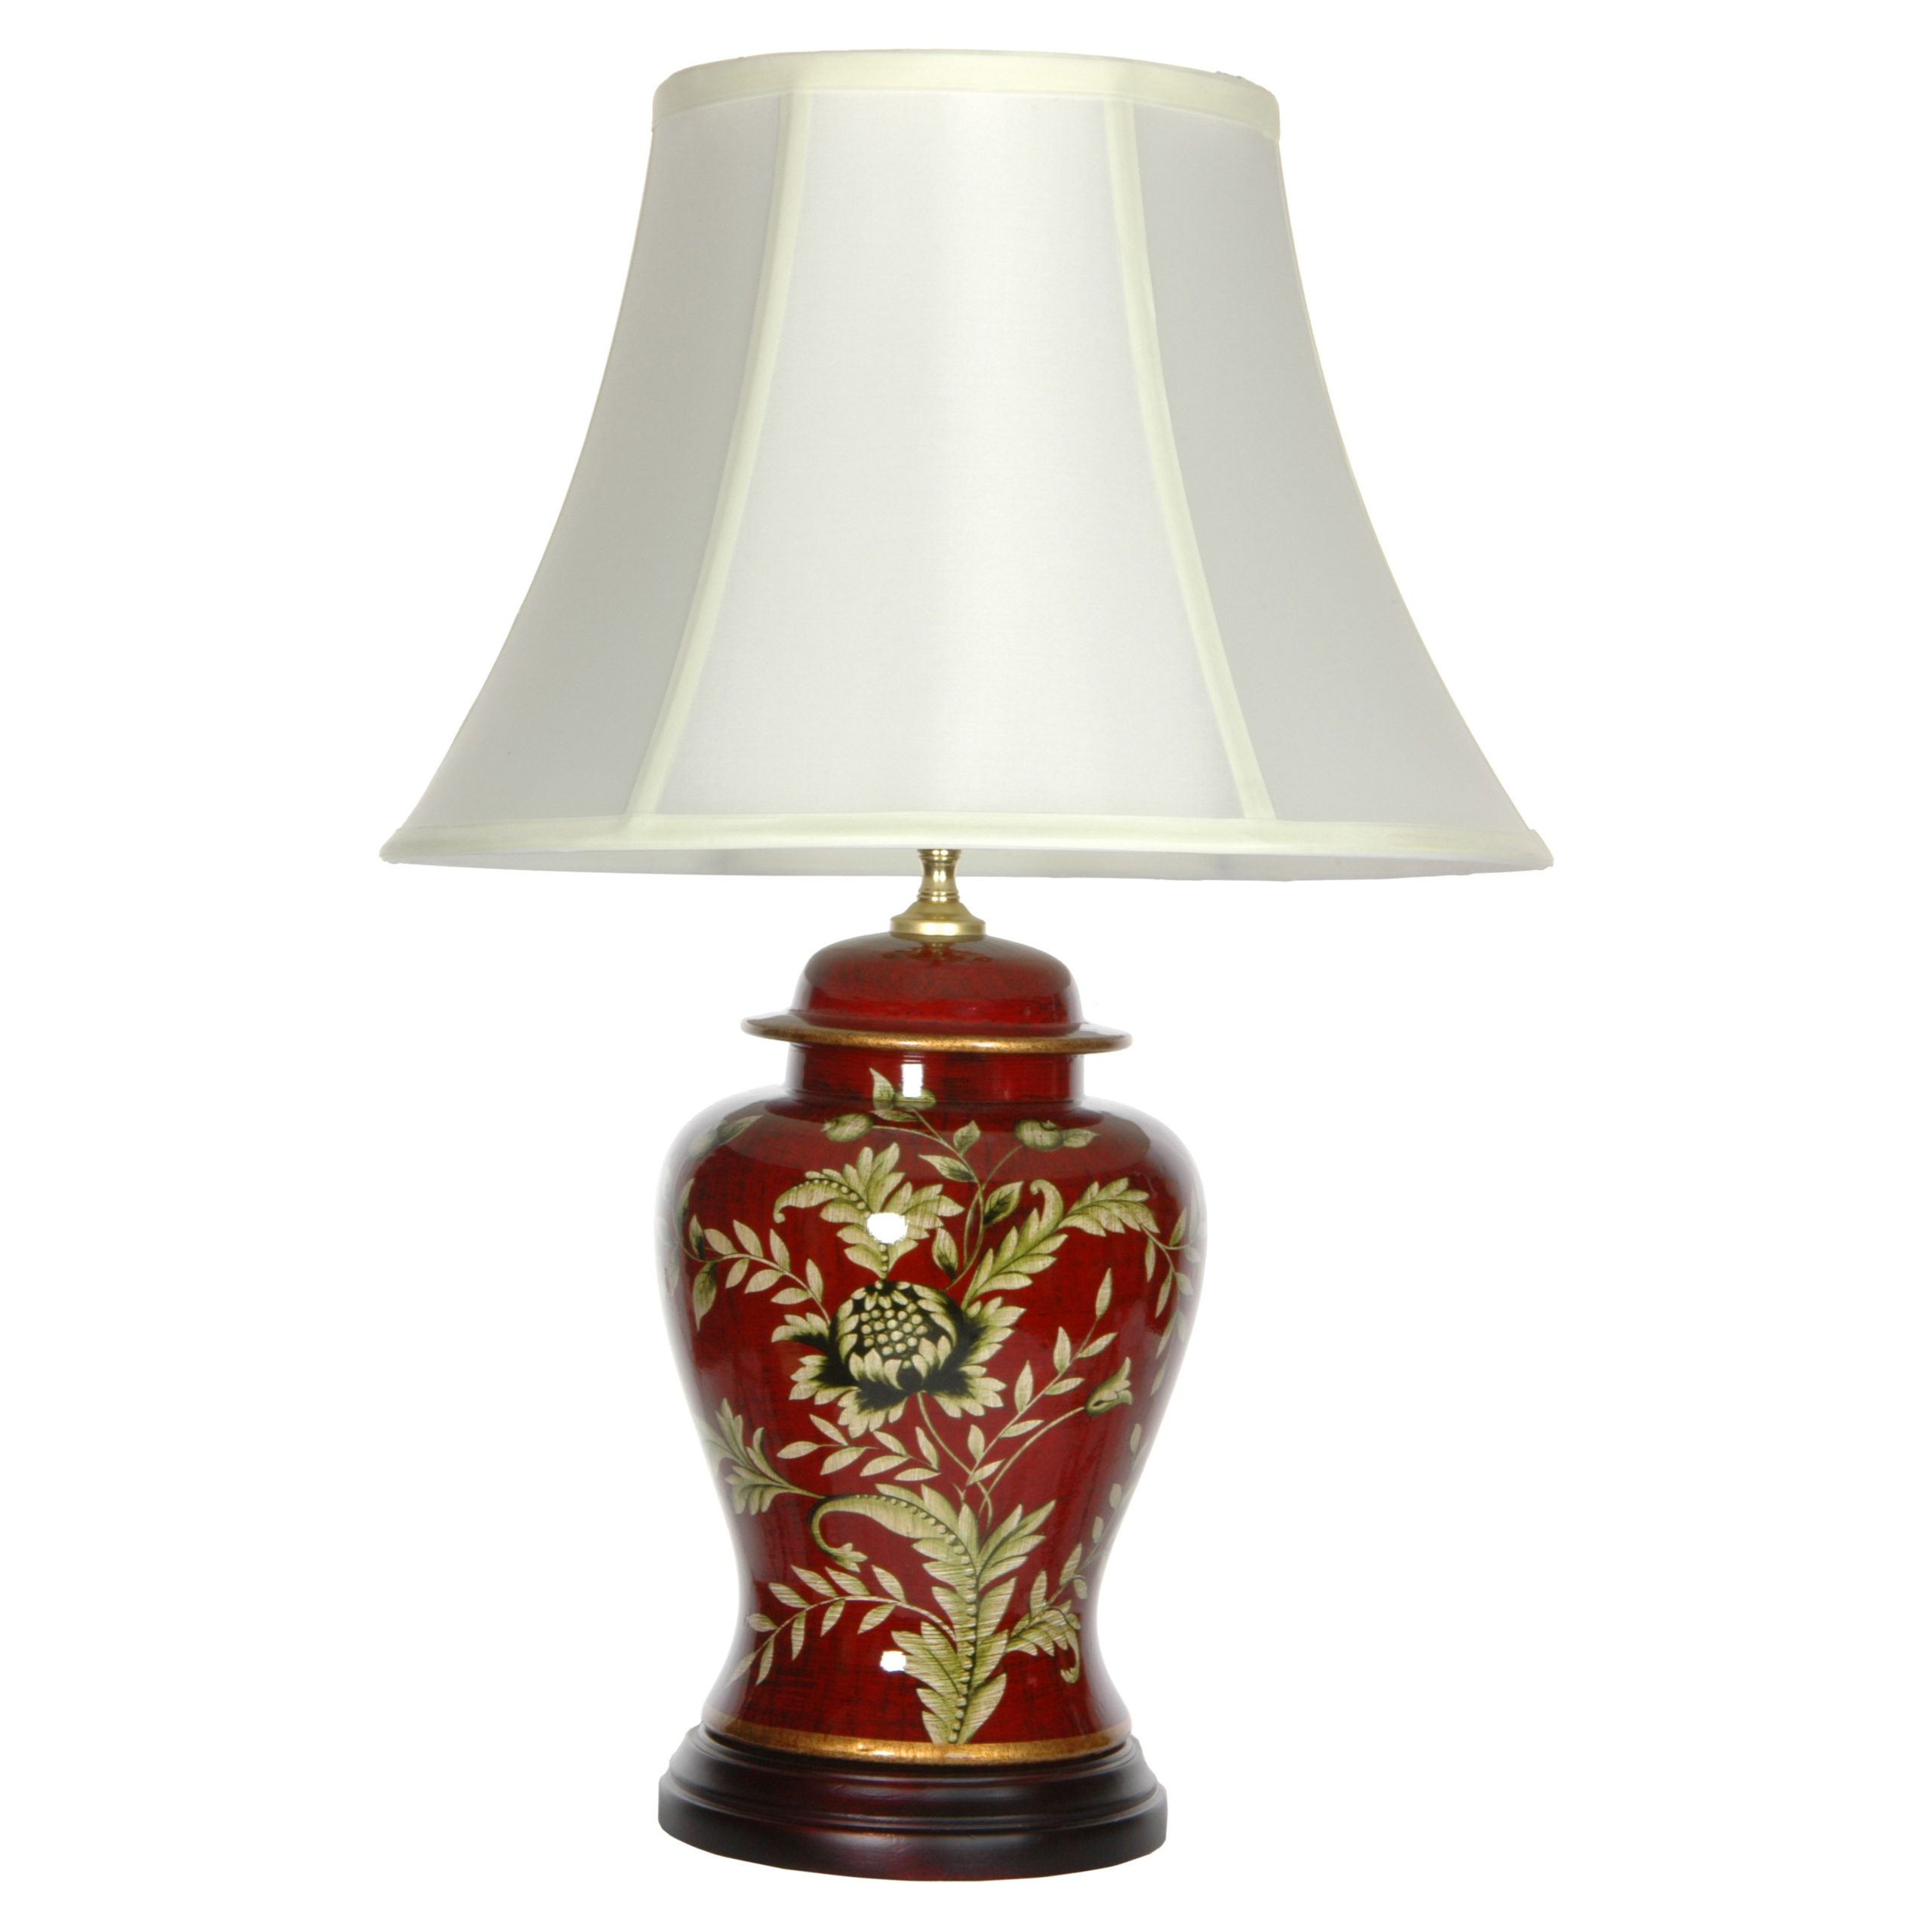 Footed Oriental Wooden Lamp Base Hardwood Base 10257RJB Details about   6 1/2" Rosewood Finish 